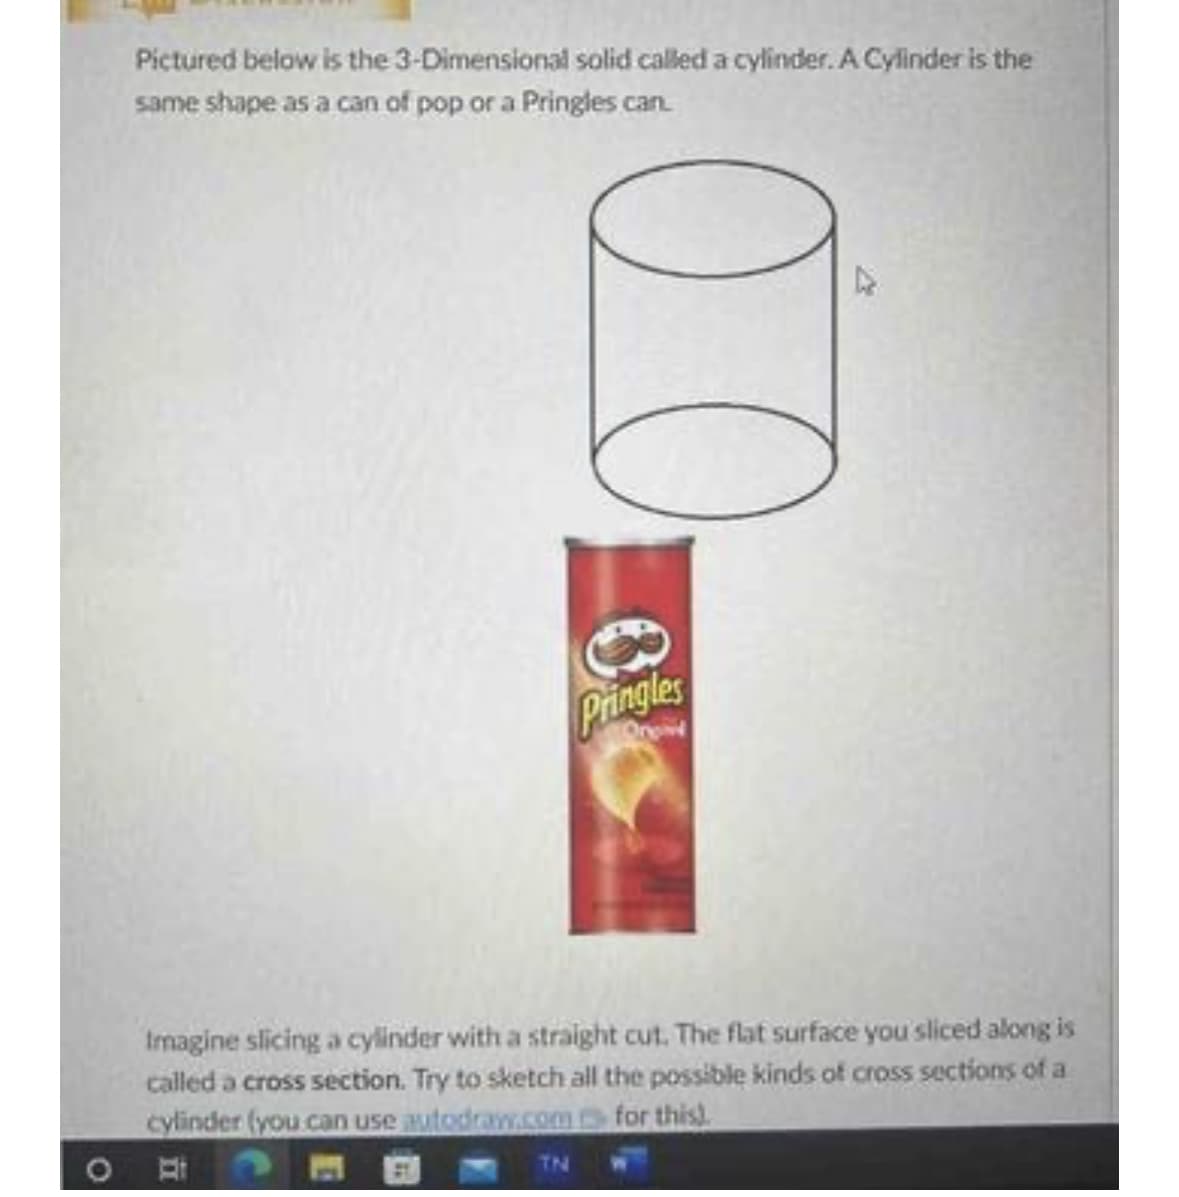 Pictured below is the 3-Dimensional solid called a cylinder. A Cylinder is the
same shape as a can of pop or a Pringles can.
оо
Pringles
Imagine slicing a cylinder with a straight cut. The flat surface you sliced along is
called a cross section. Try to sketch all the possible kinds of cross sections of a
cylinder (you can use autodraw.com for this).
TN